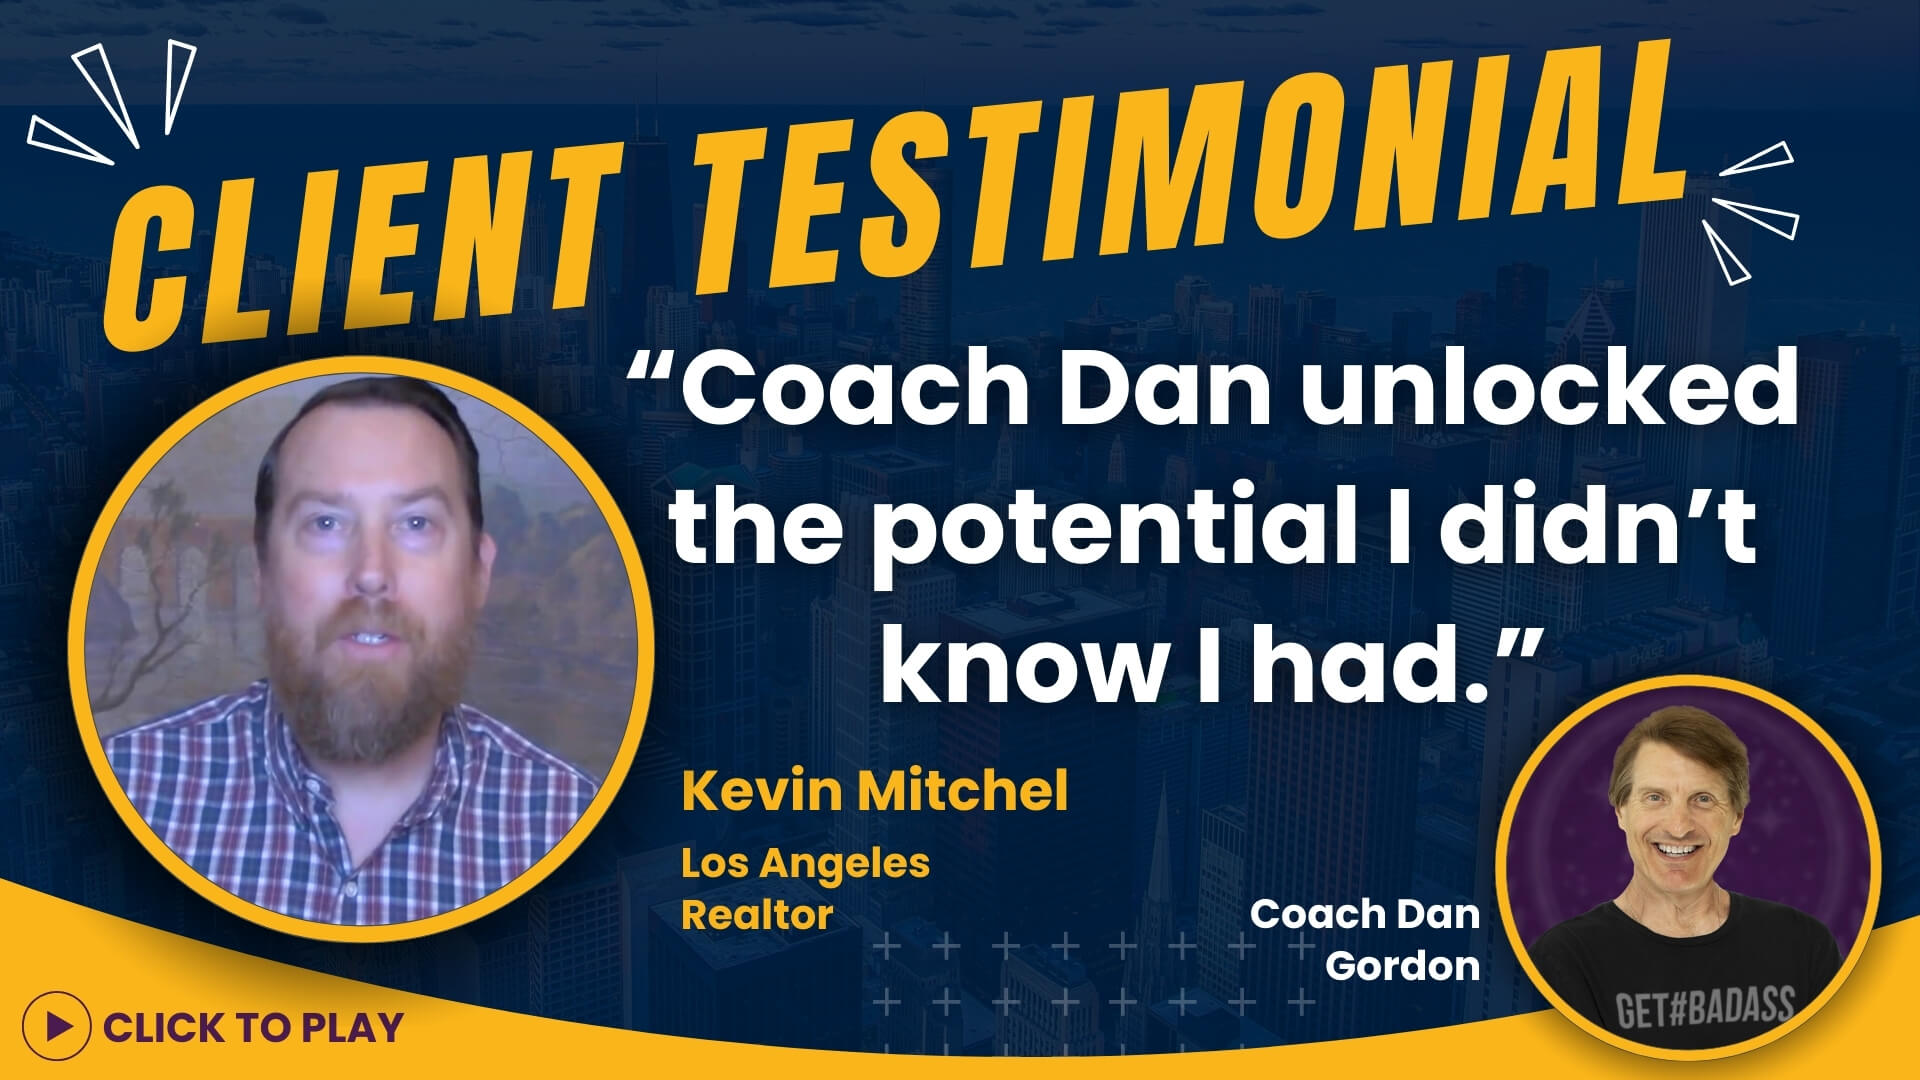 Kevin Mitchel, Los Angeles realtor, in a plaid shirt, gives a video testimonial about unlocking his potential with Coach Dan Gordon's help.